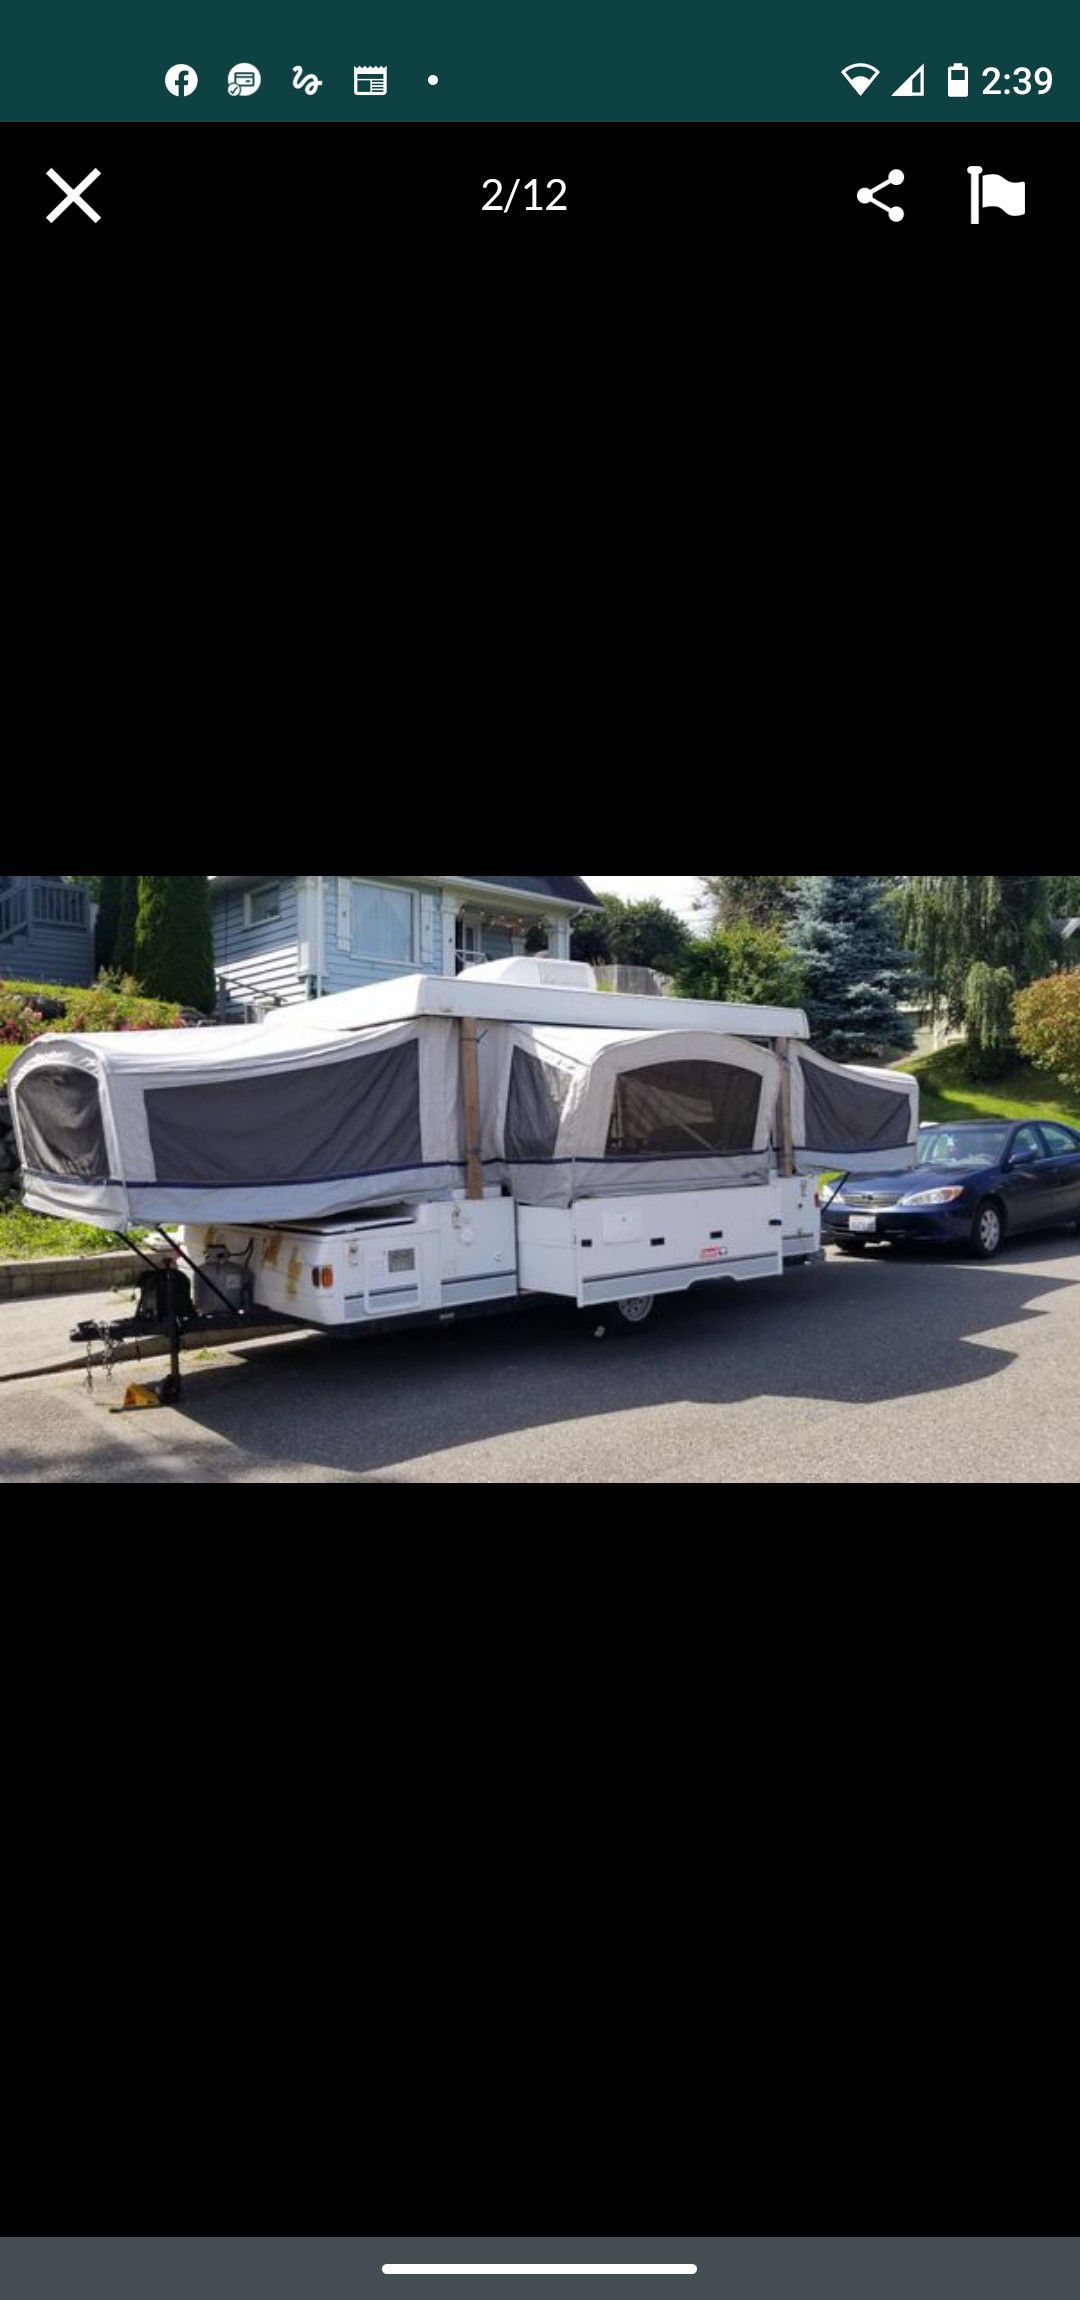 2003 coleman pop up tent trailer with slide out